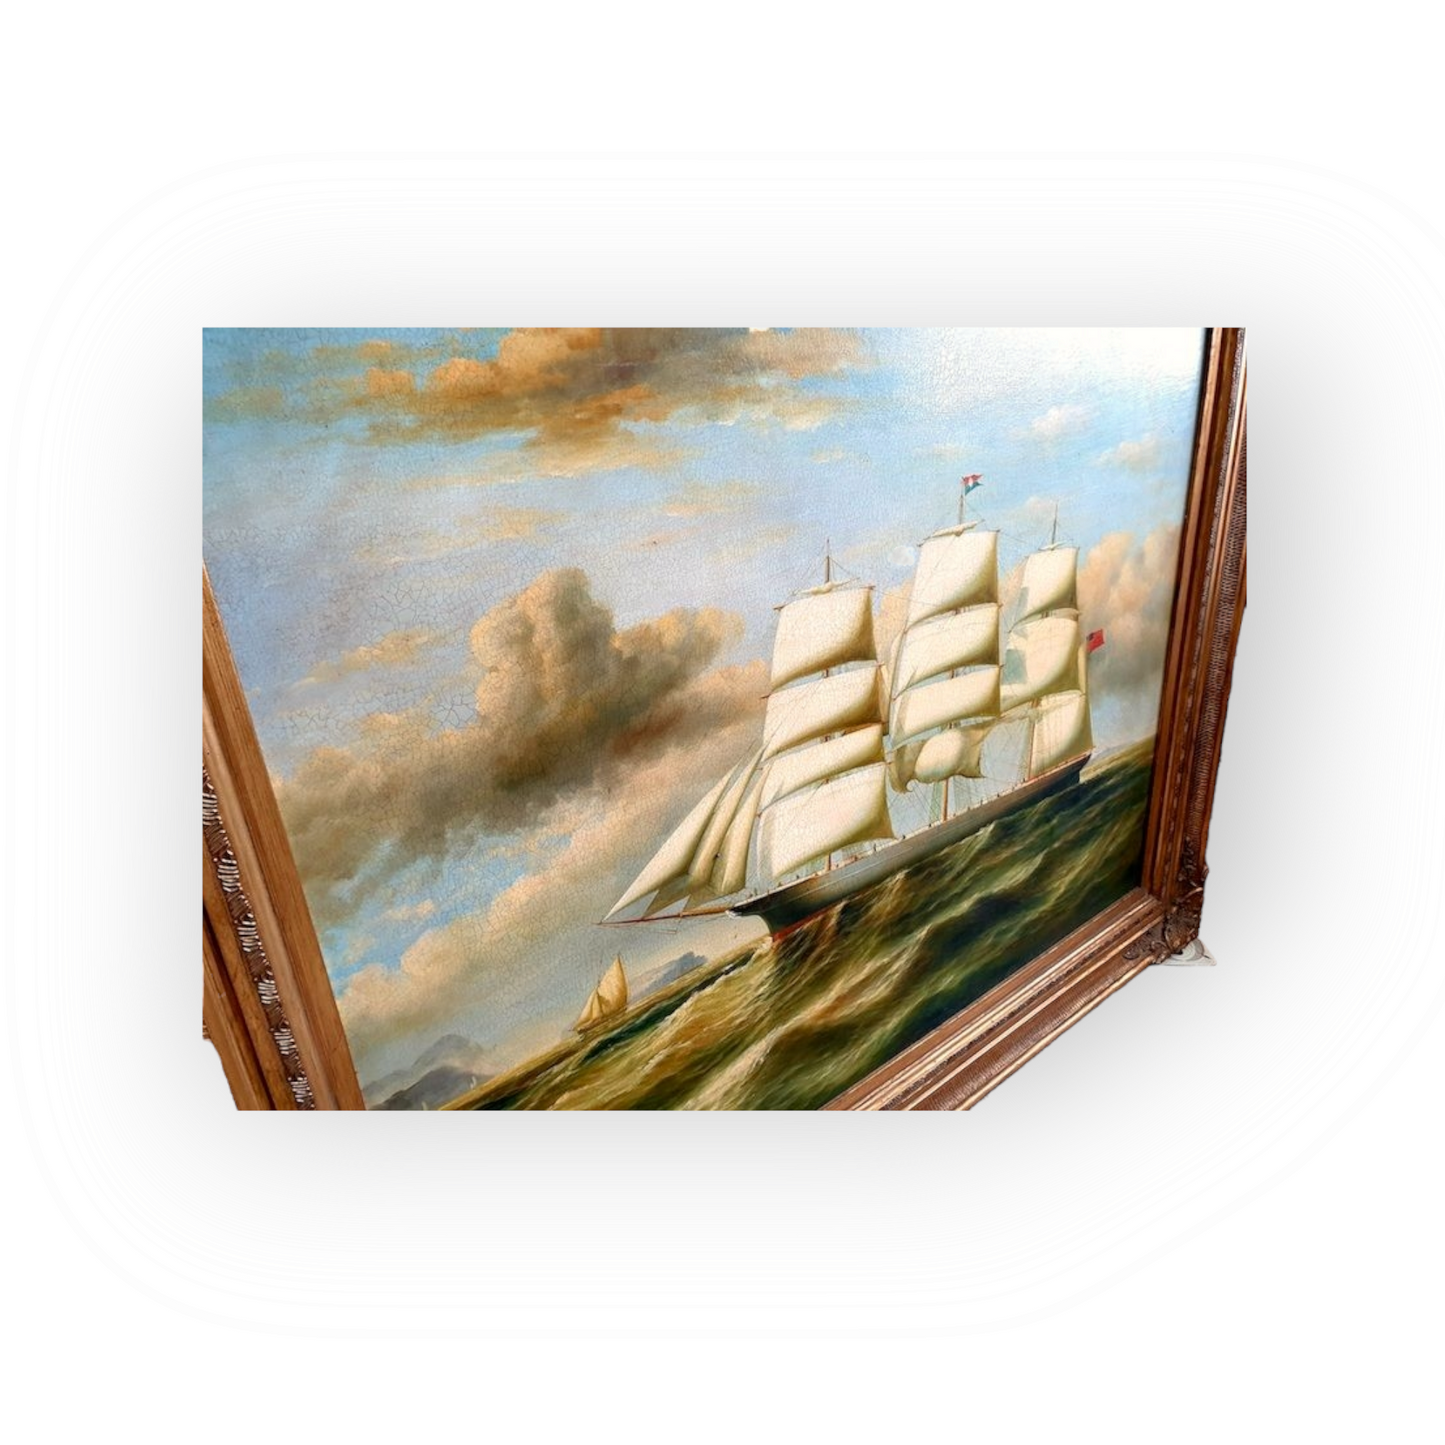 Large & Impressive 19th Century Style Oil on Canvas Painting of a Tall Ship or Schooner